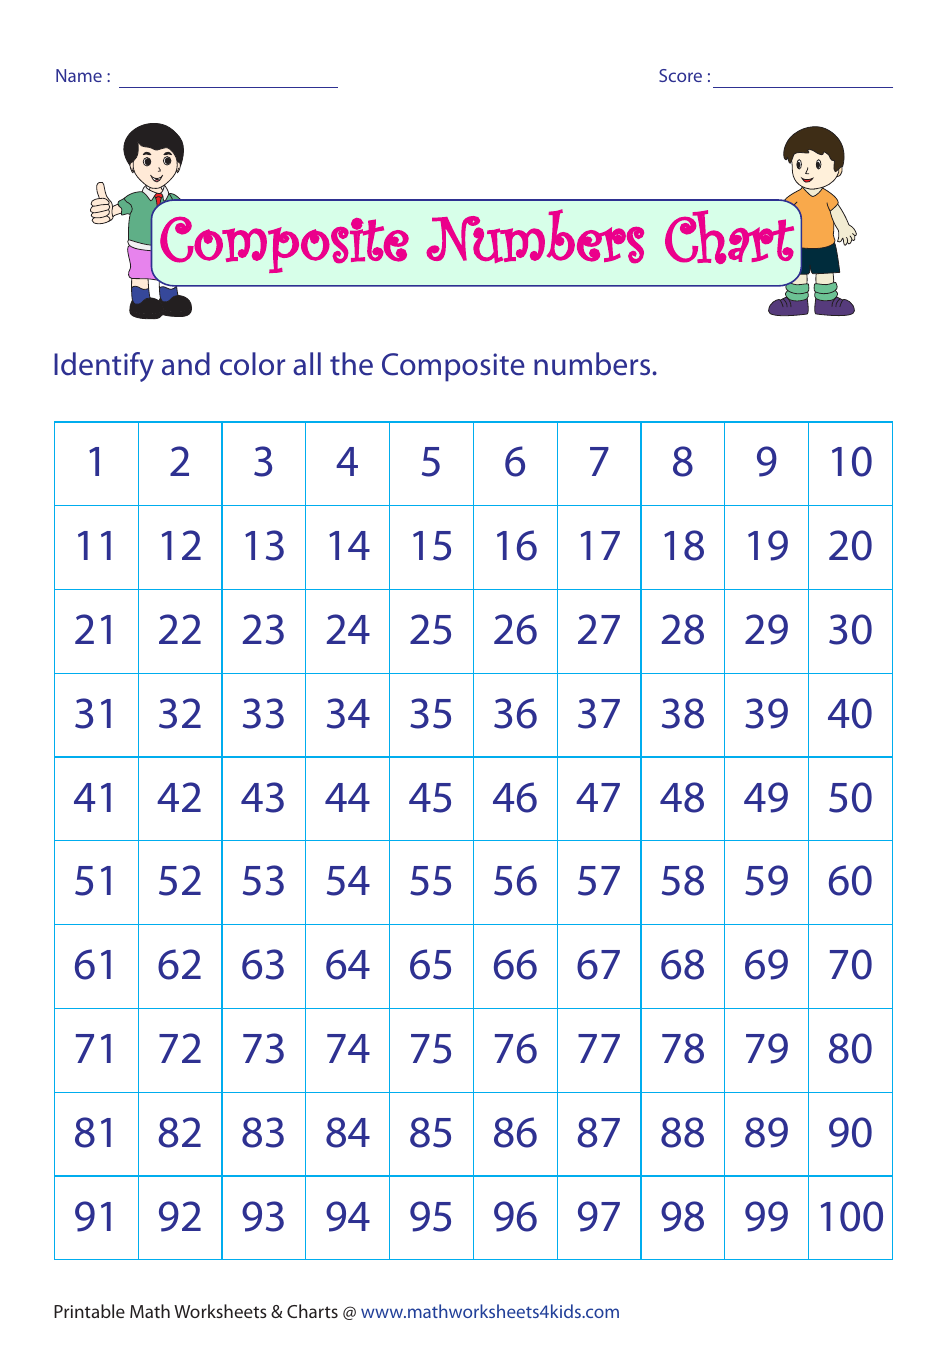 Composite Numbers Chart Worksheet With Answer Key Preview